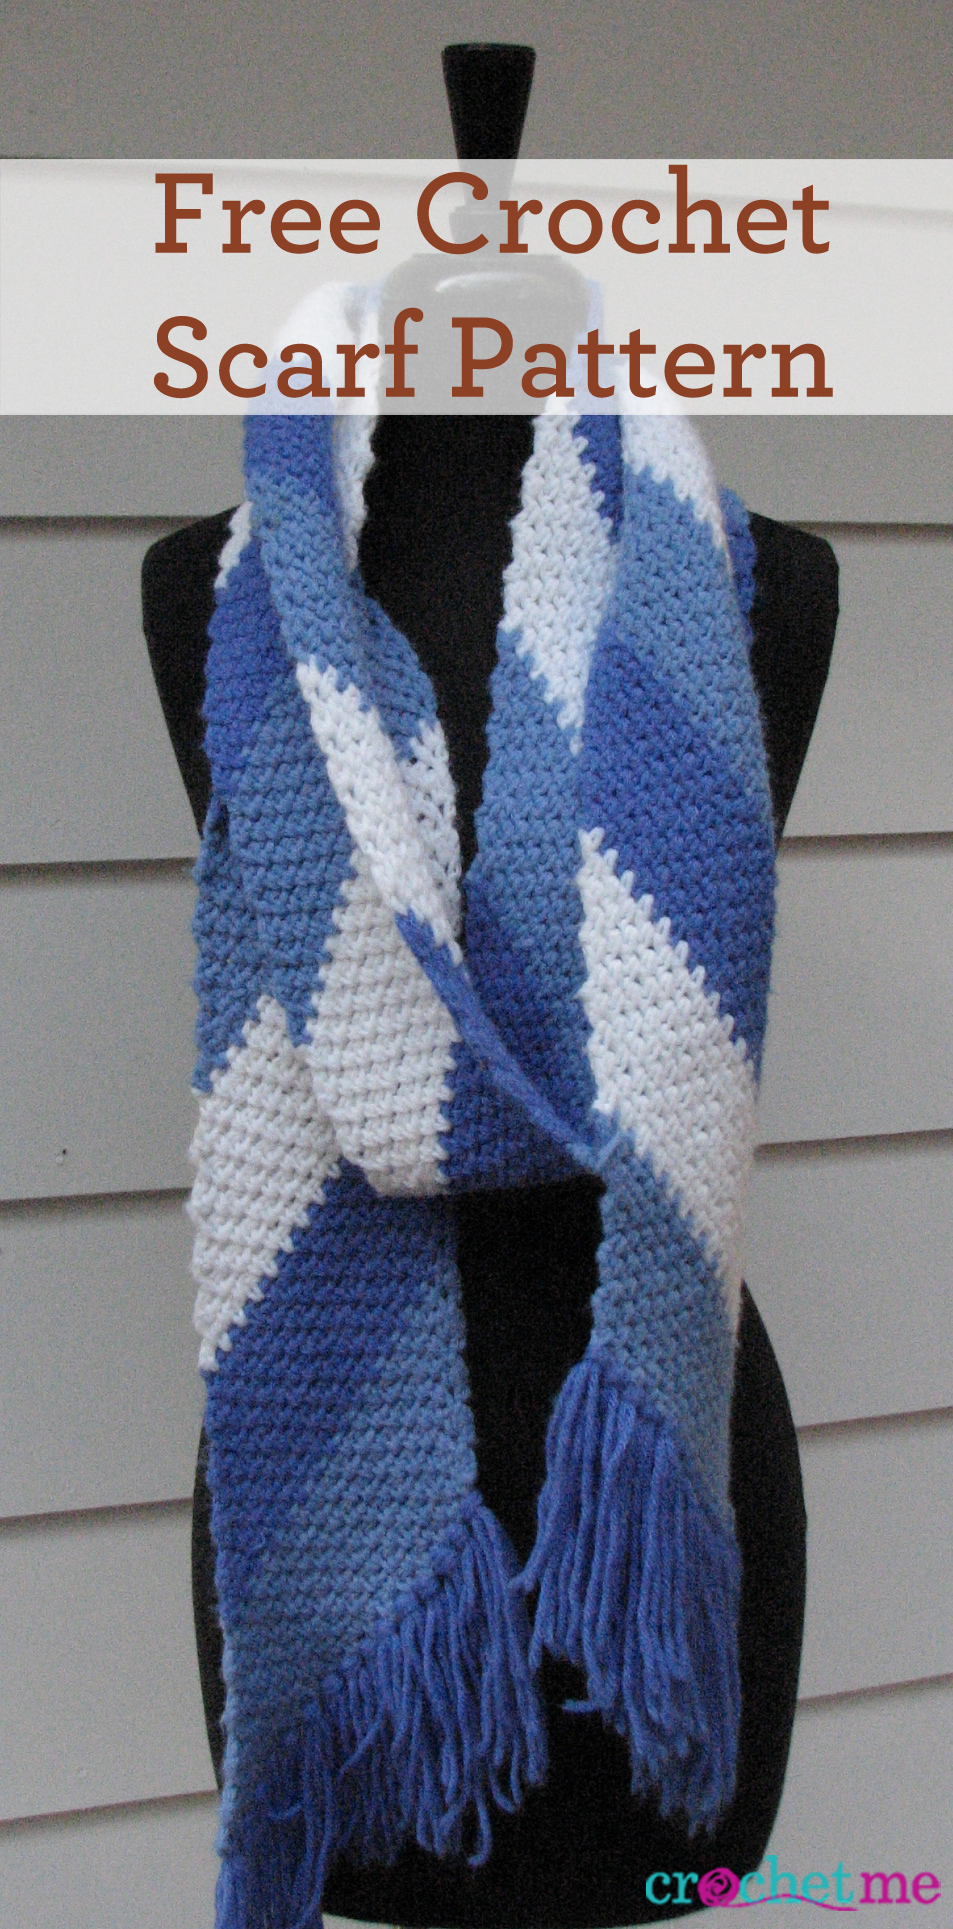 Free Easy Knitting Scarf Patterns For Beginners Free Crochet Simple Striped Scarf Pattern Interweave